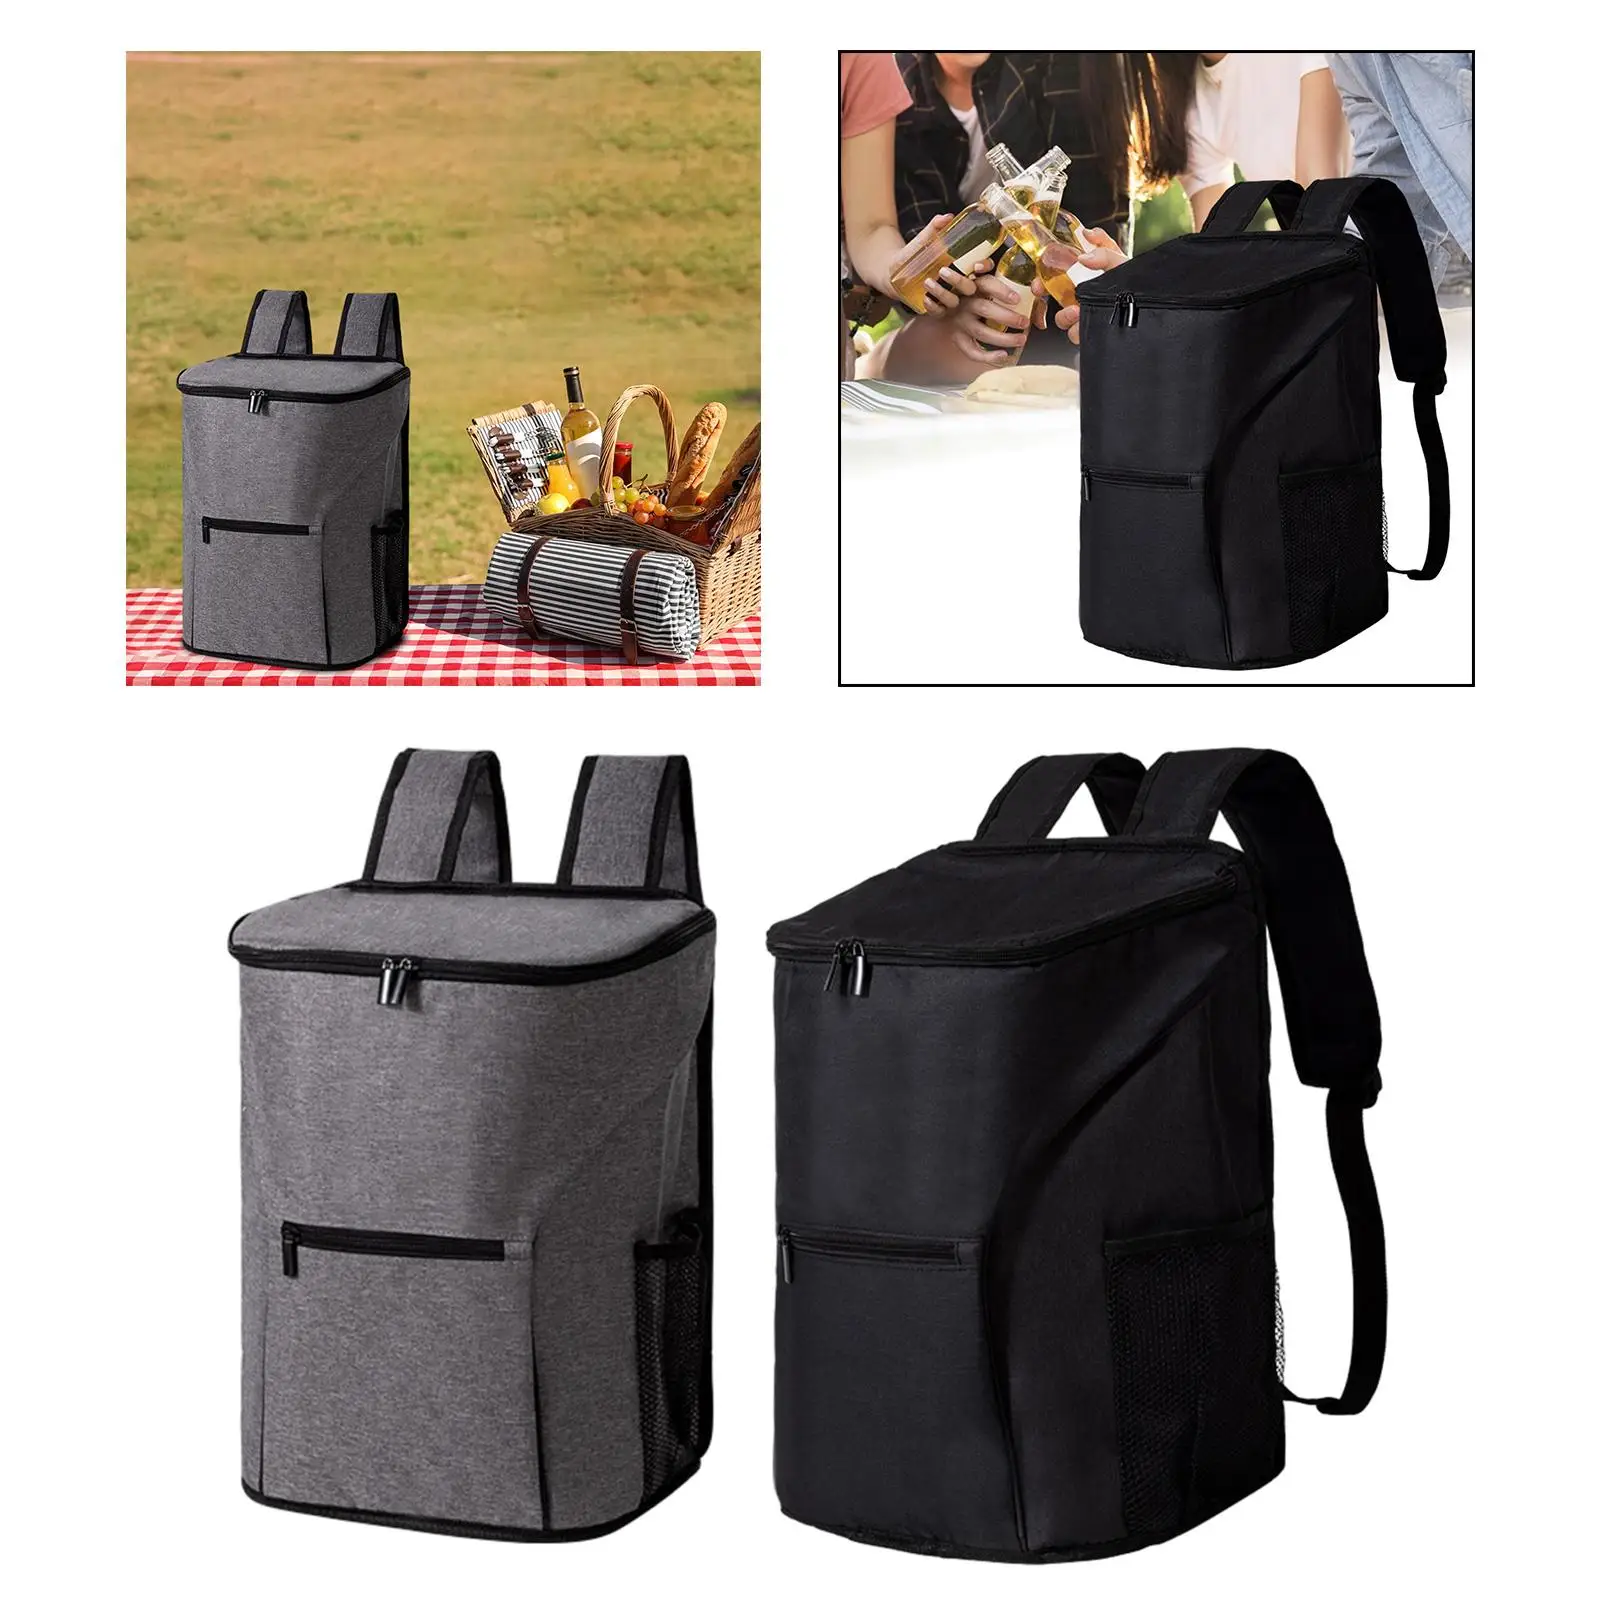 Insulated Cooler Bag Multifunctional Men Women Leakproof Insulated Backpack Beach Cooler for Lunch Travel Work Hiking Outdoor